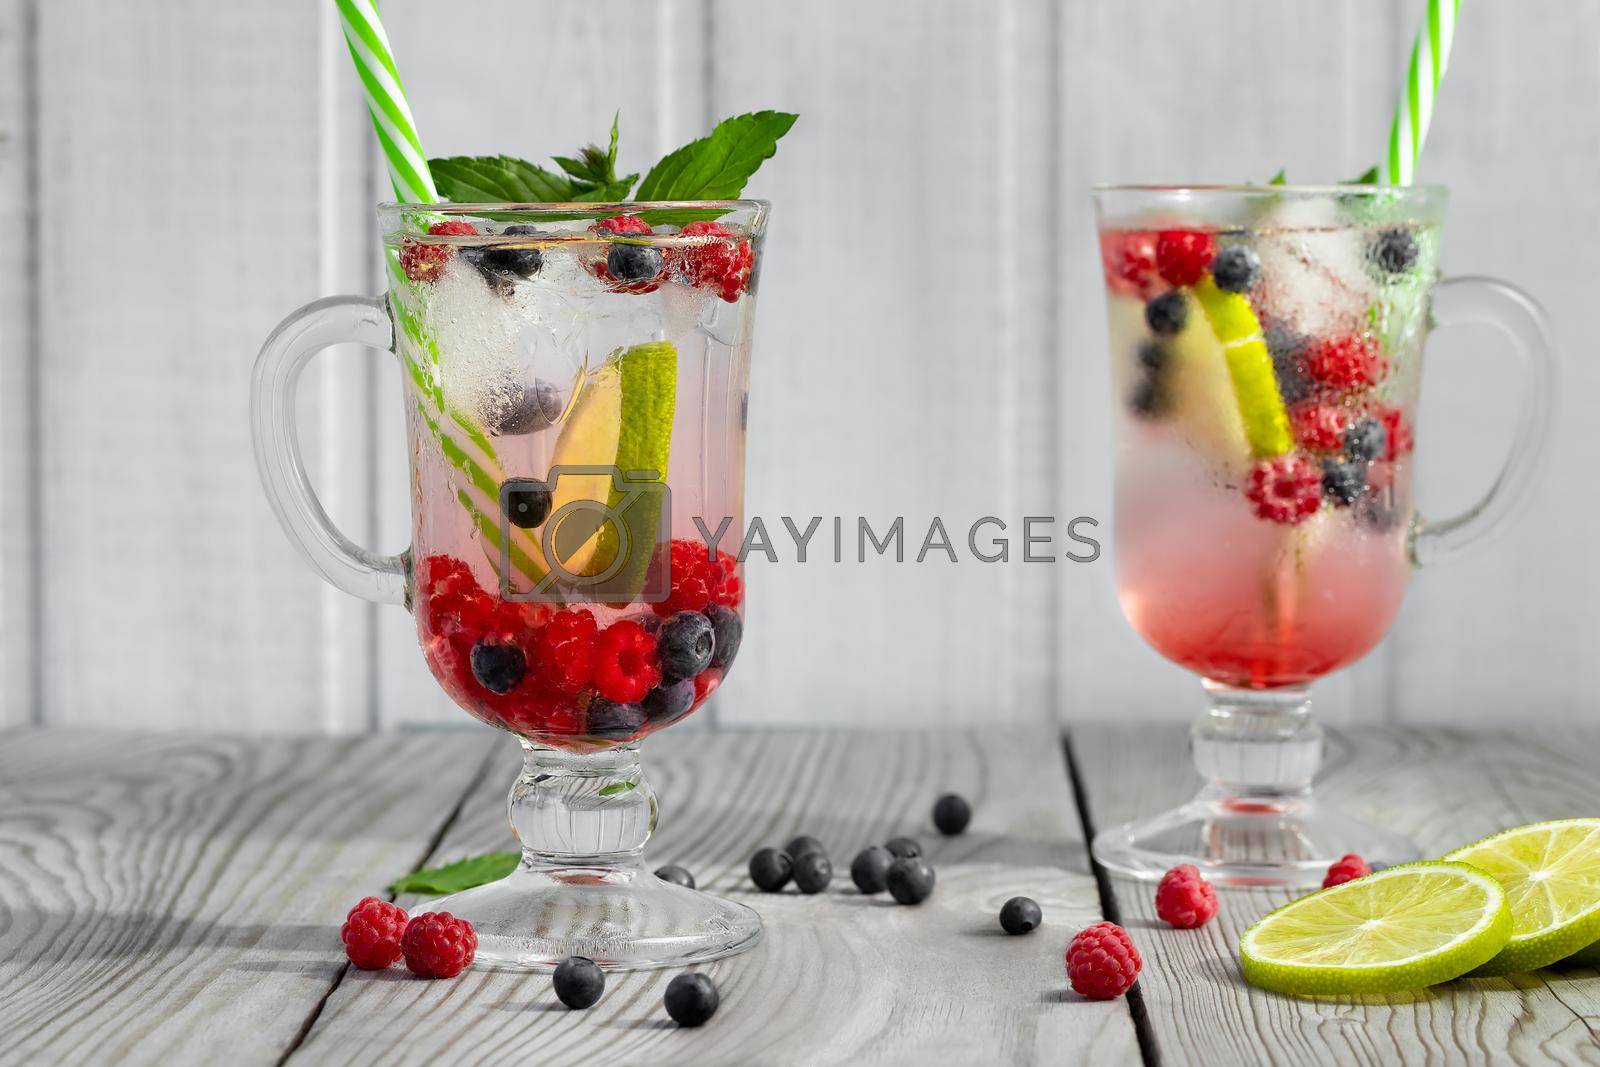 Royalty free image of Fresh homemade summer cocktails with ice, lime and berries in glasses with a straw by galsand